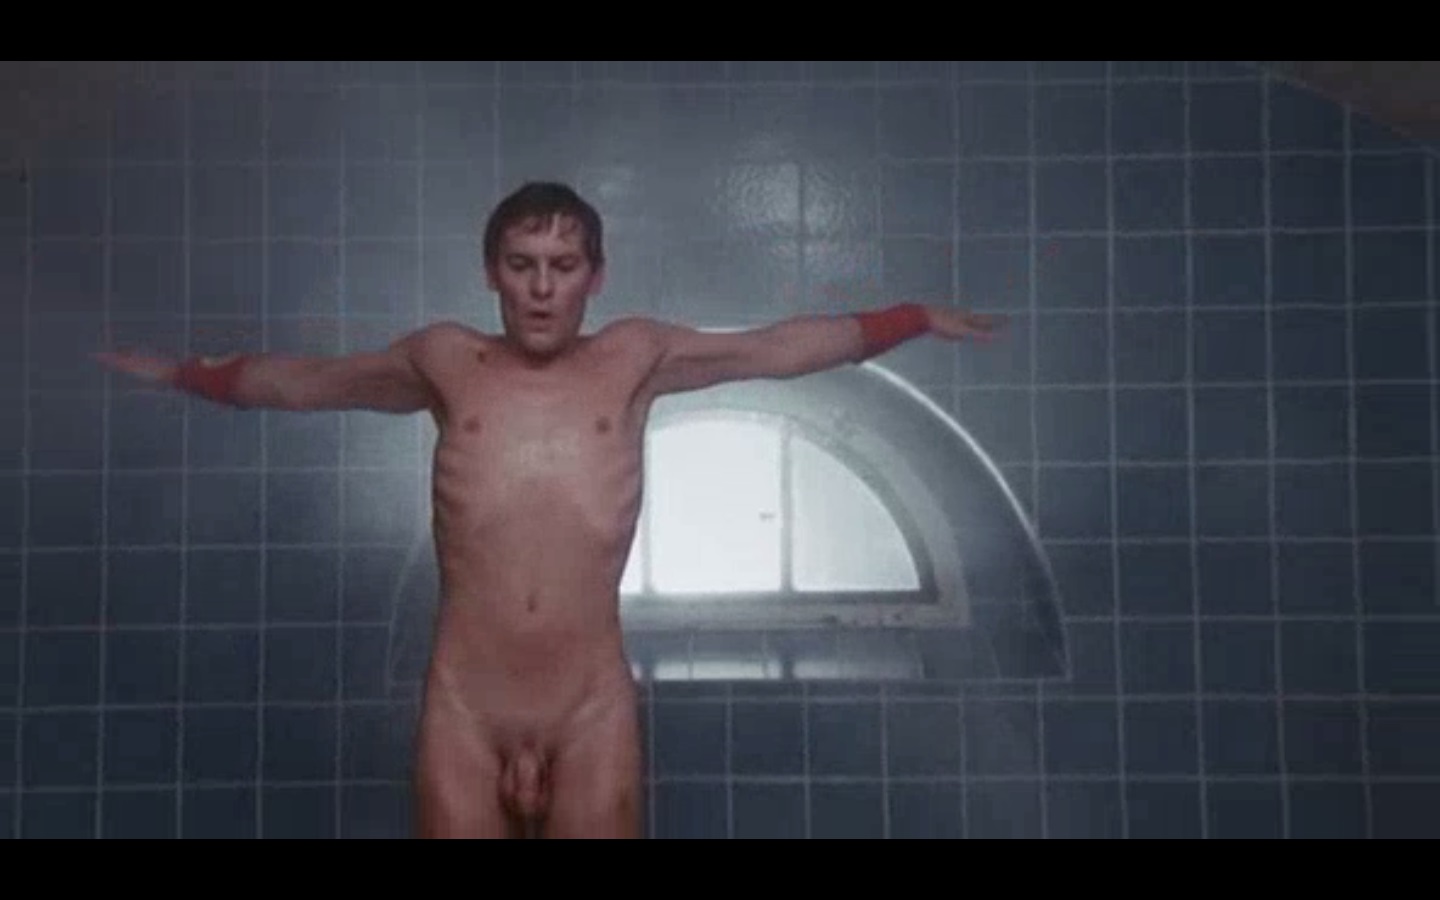 Helmut berger nude Album - Top adult videos and photos.